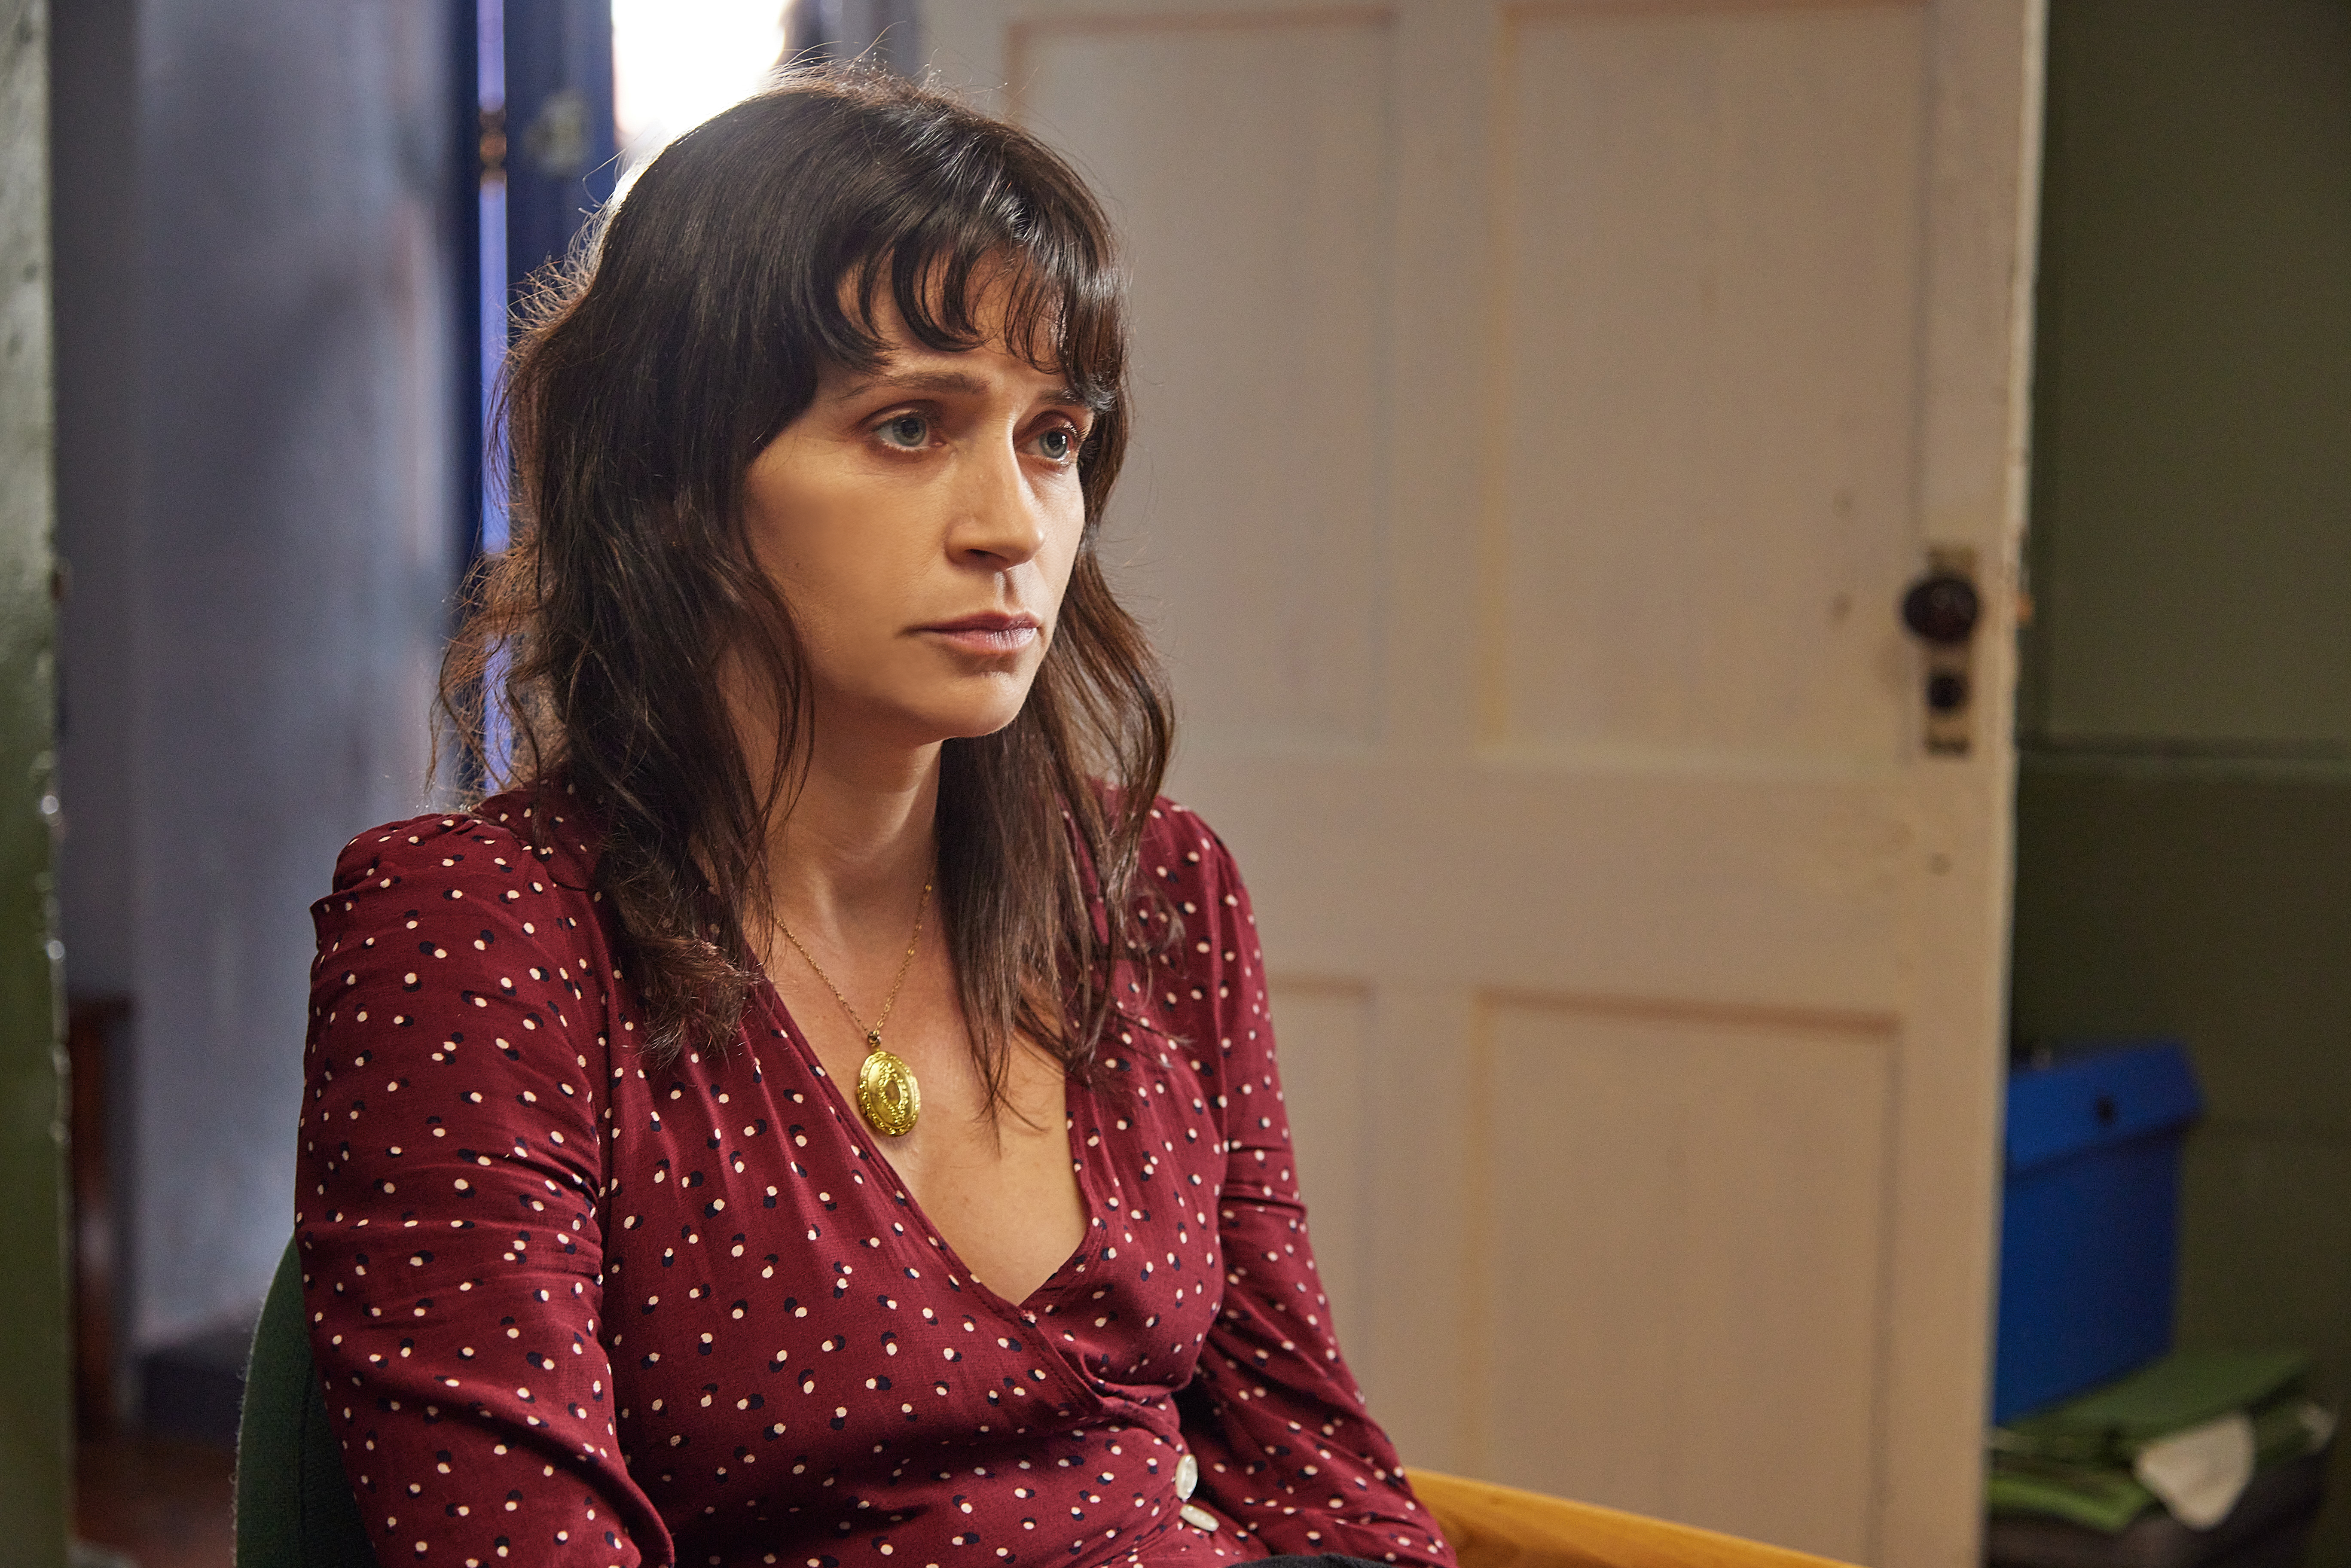 ‘Holding’ – Charlene McKenna as Evelyn Ross (image courtesy of Britbox)